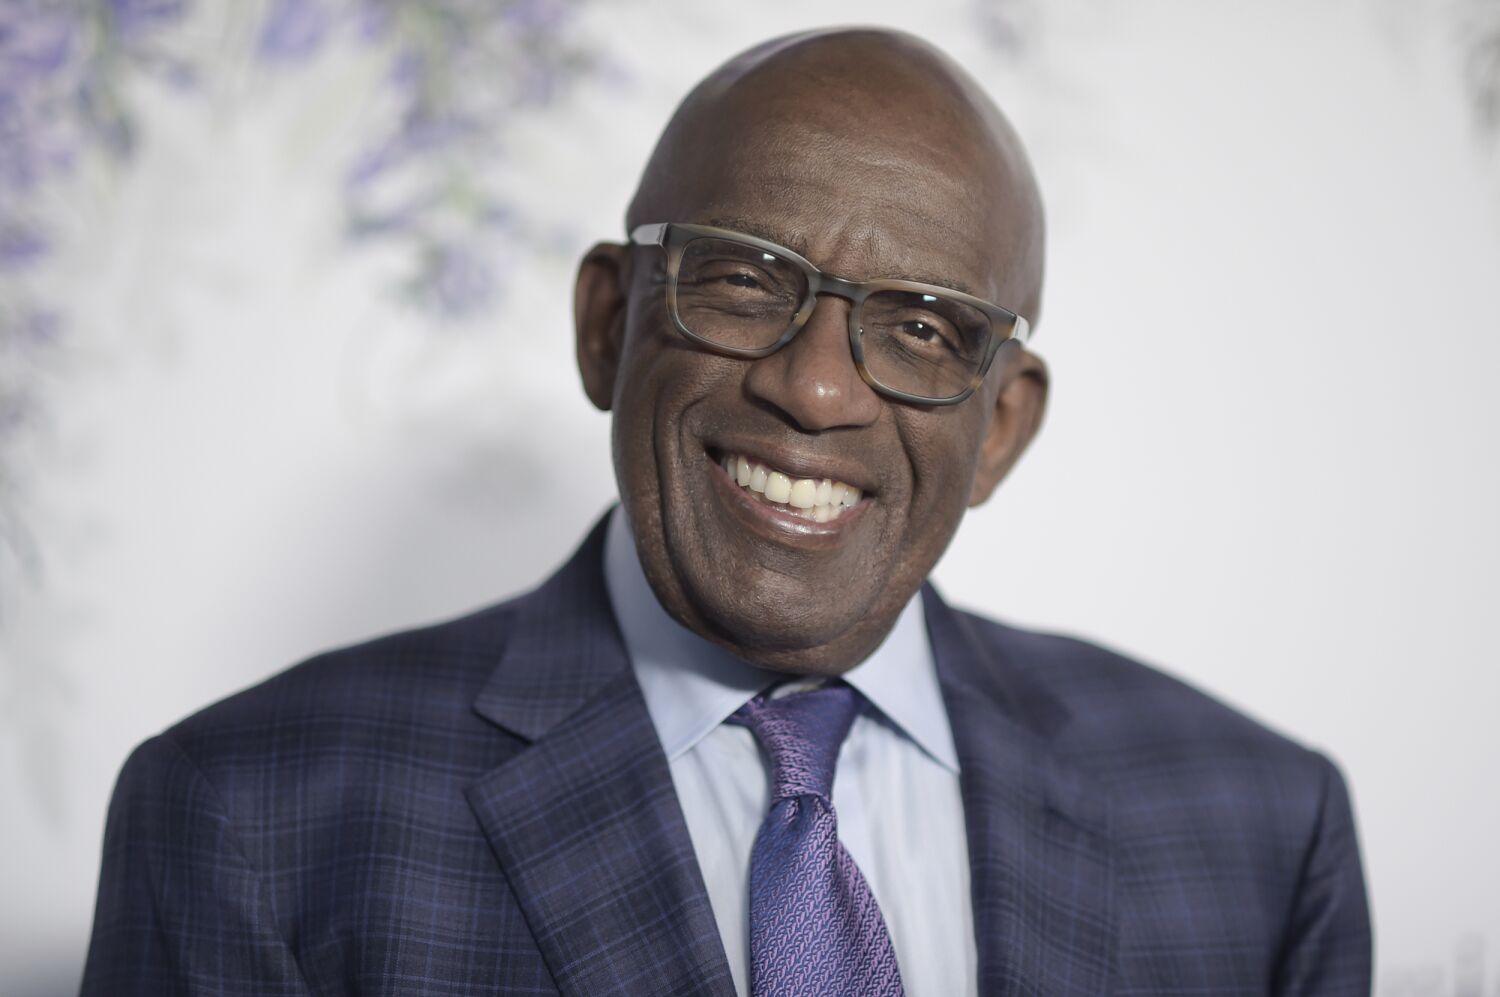 'Living, breathing miracle' Al Roker returns to 'Today' after 'hardest' hospitalization